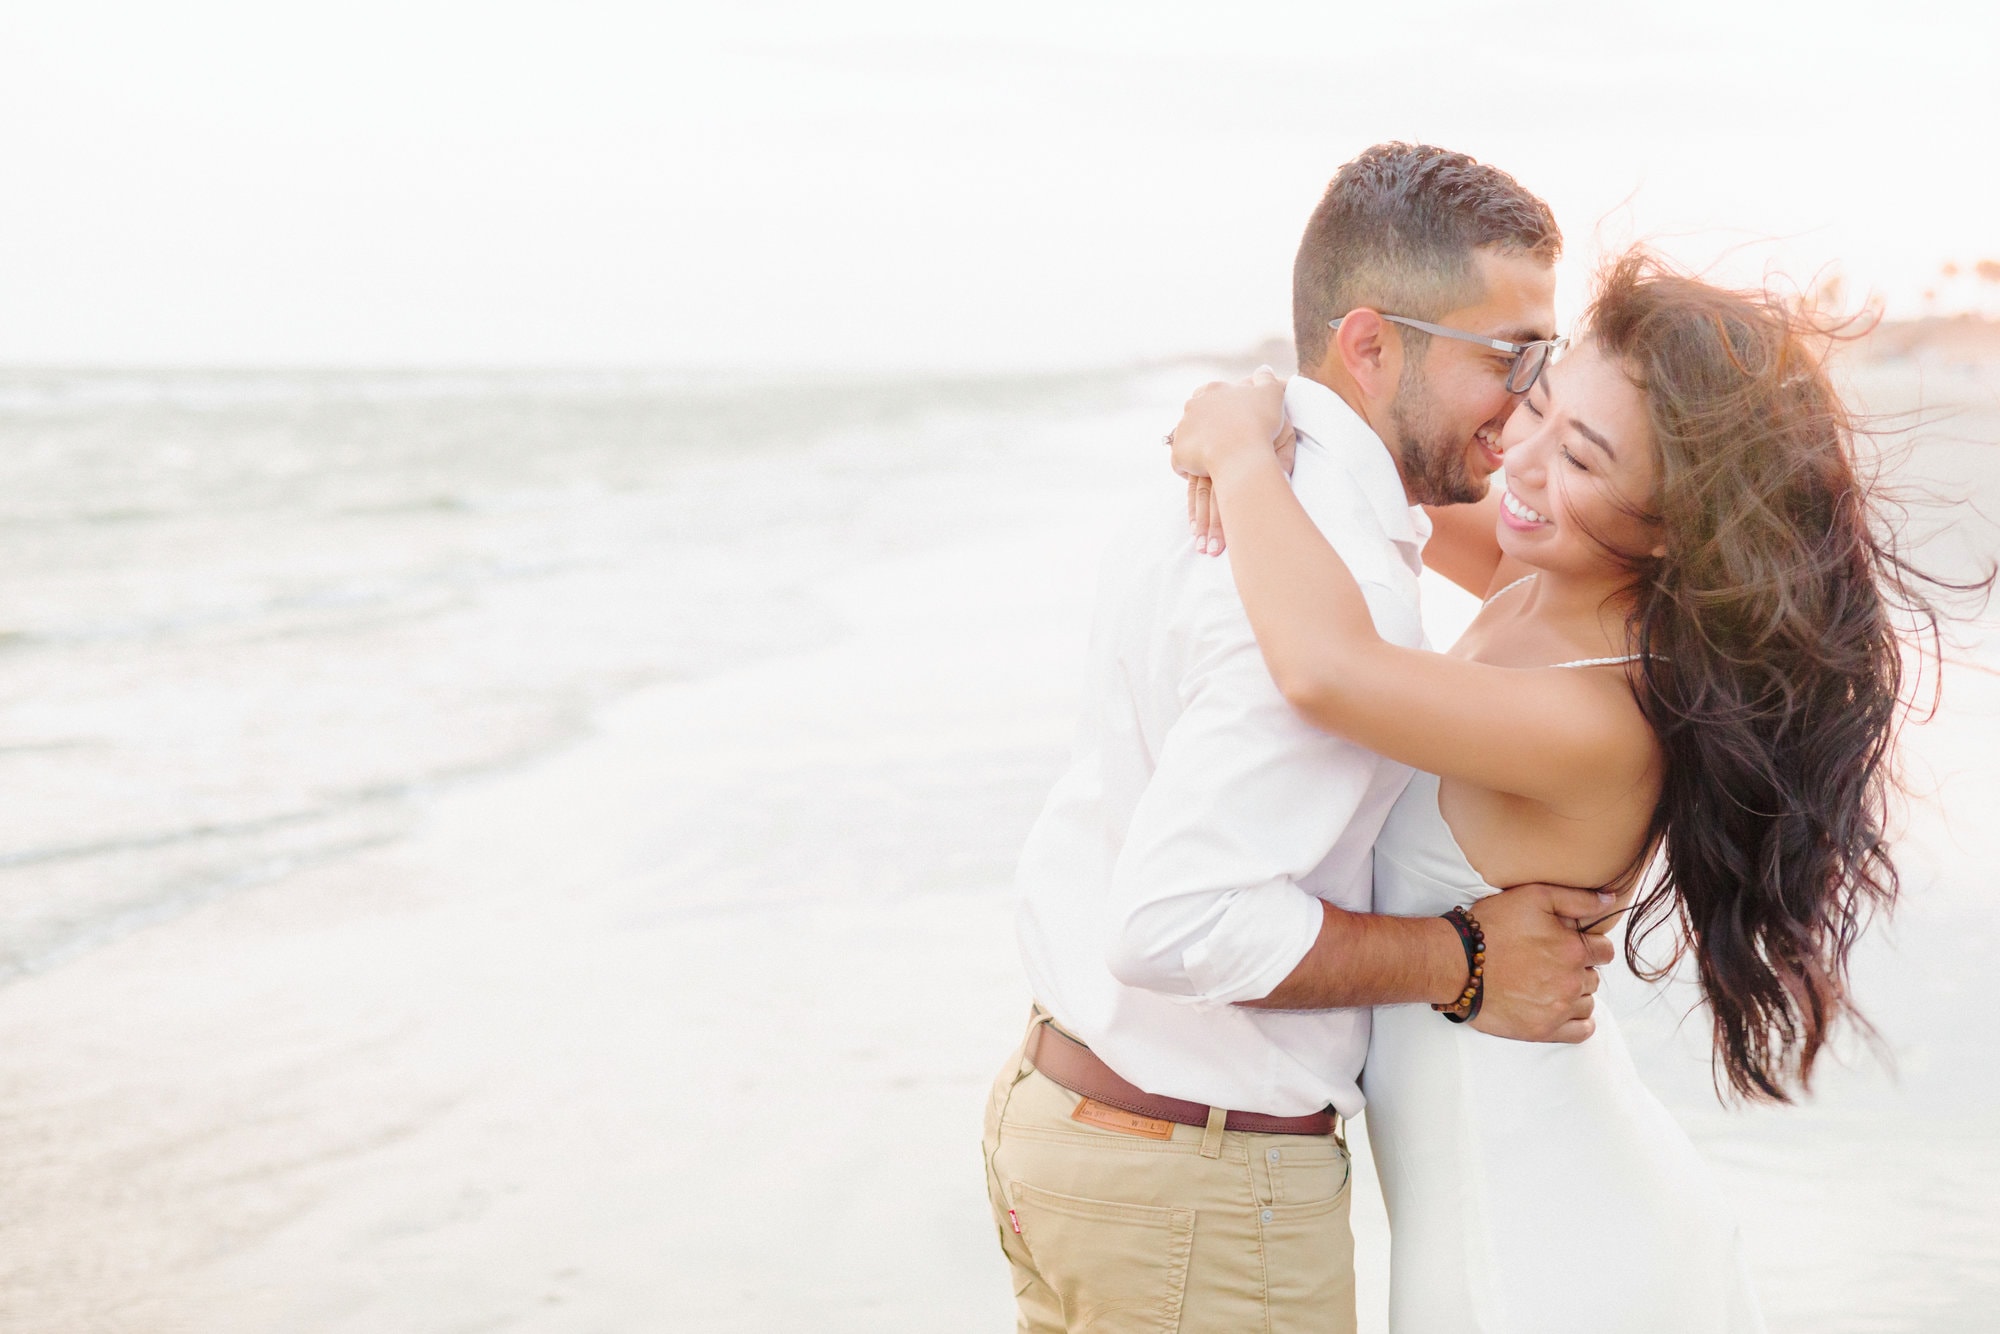 The couple holds each other close and giggles for their engagement pictures, while the calm waves of the beach are shown in the background.